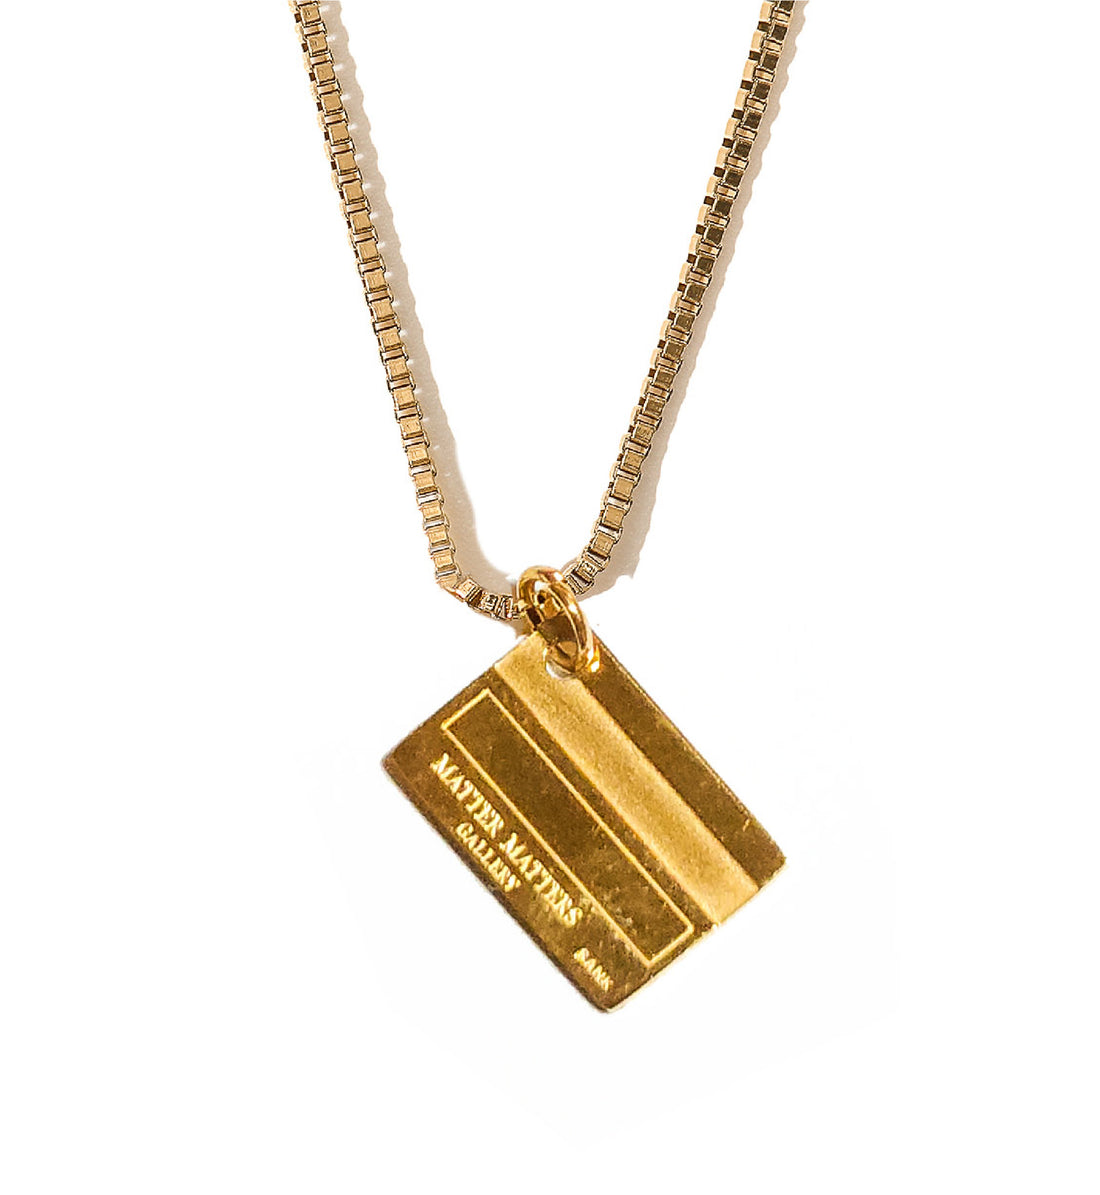 Unlimited Funds Credit Card Necklace • Gold